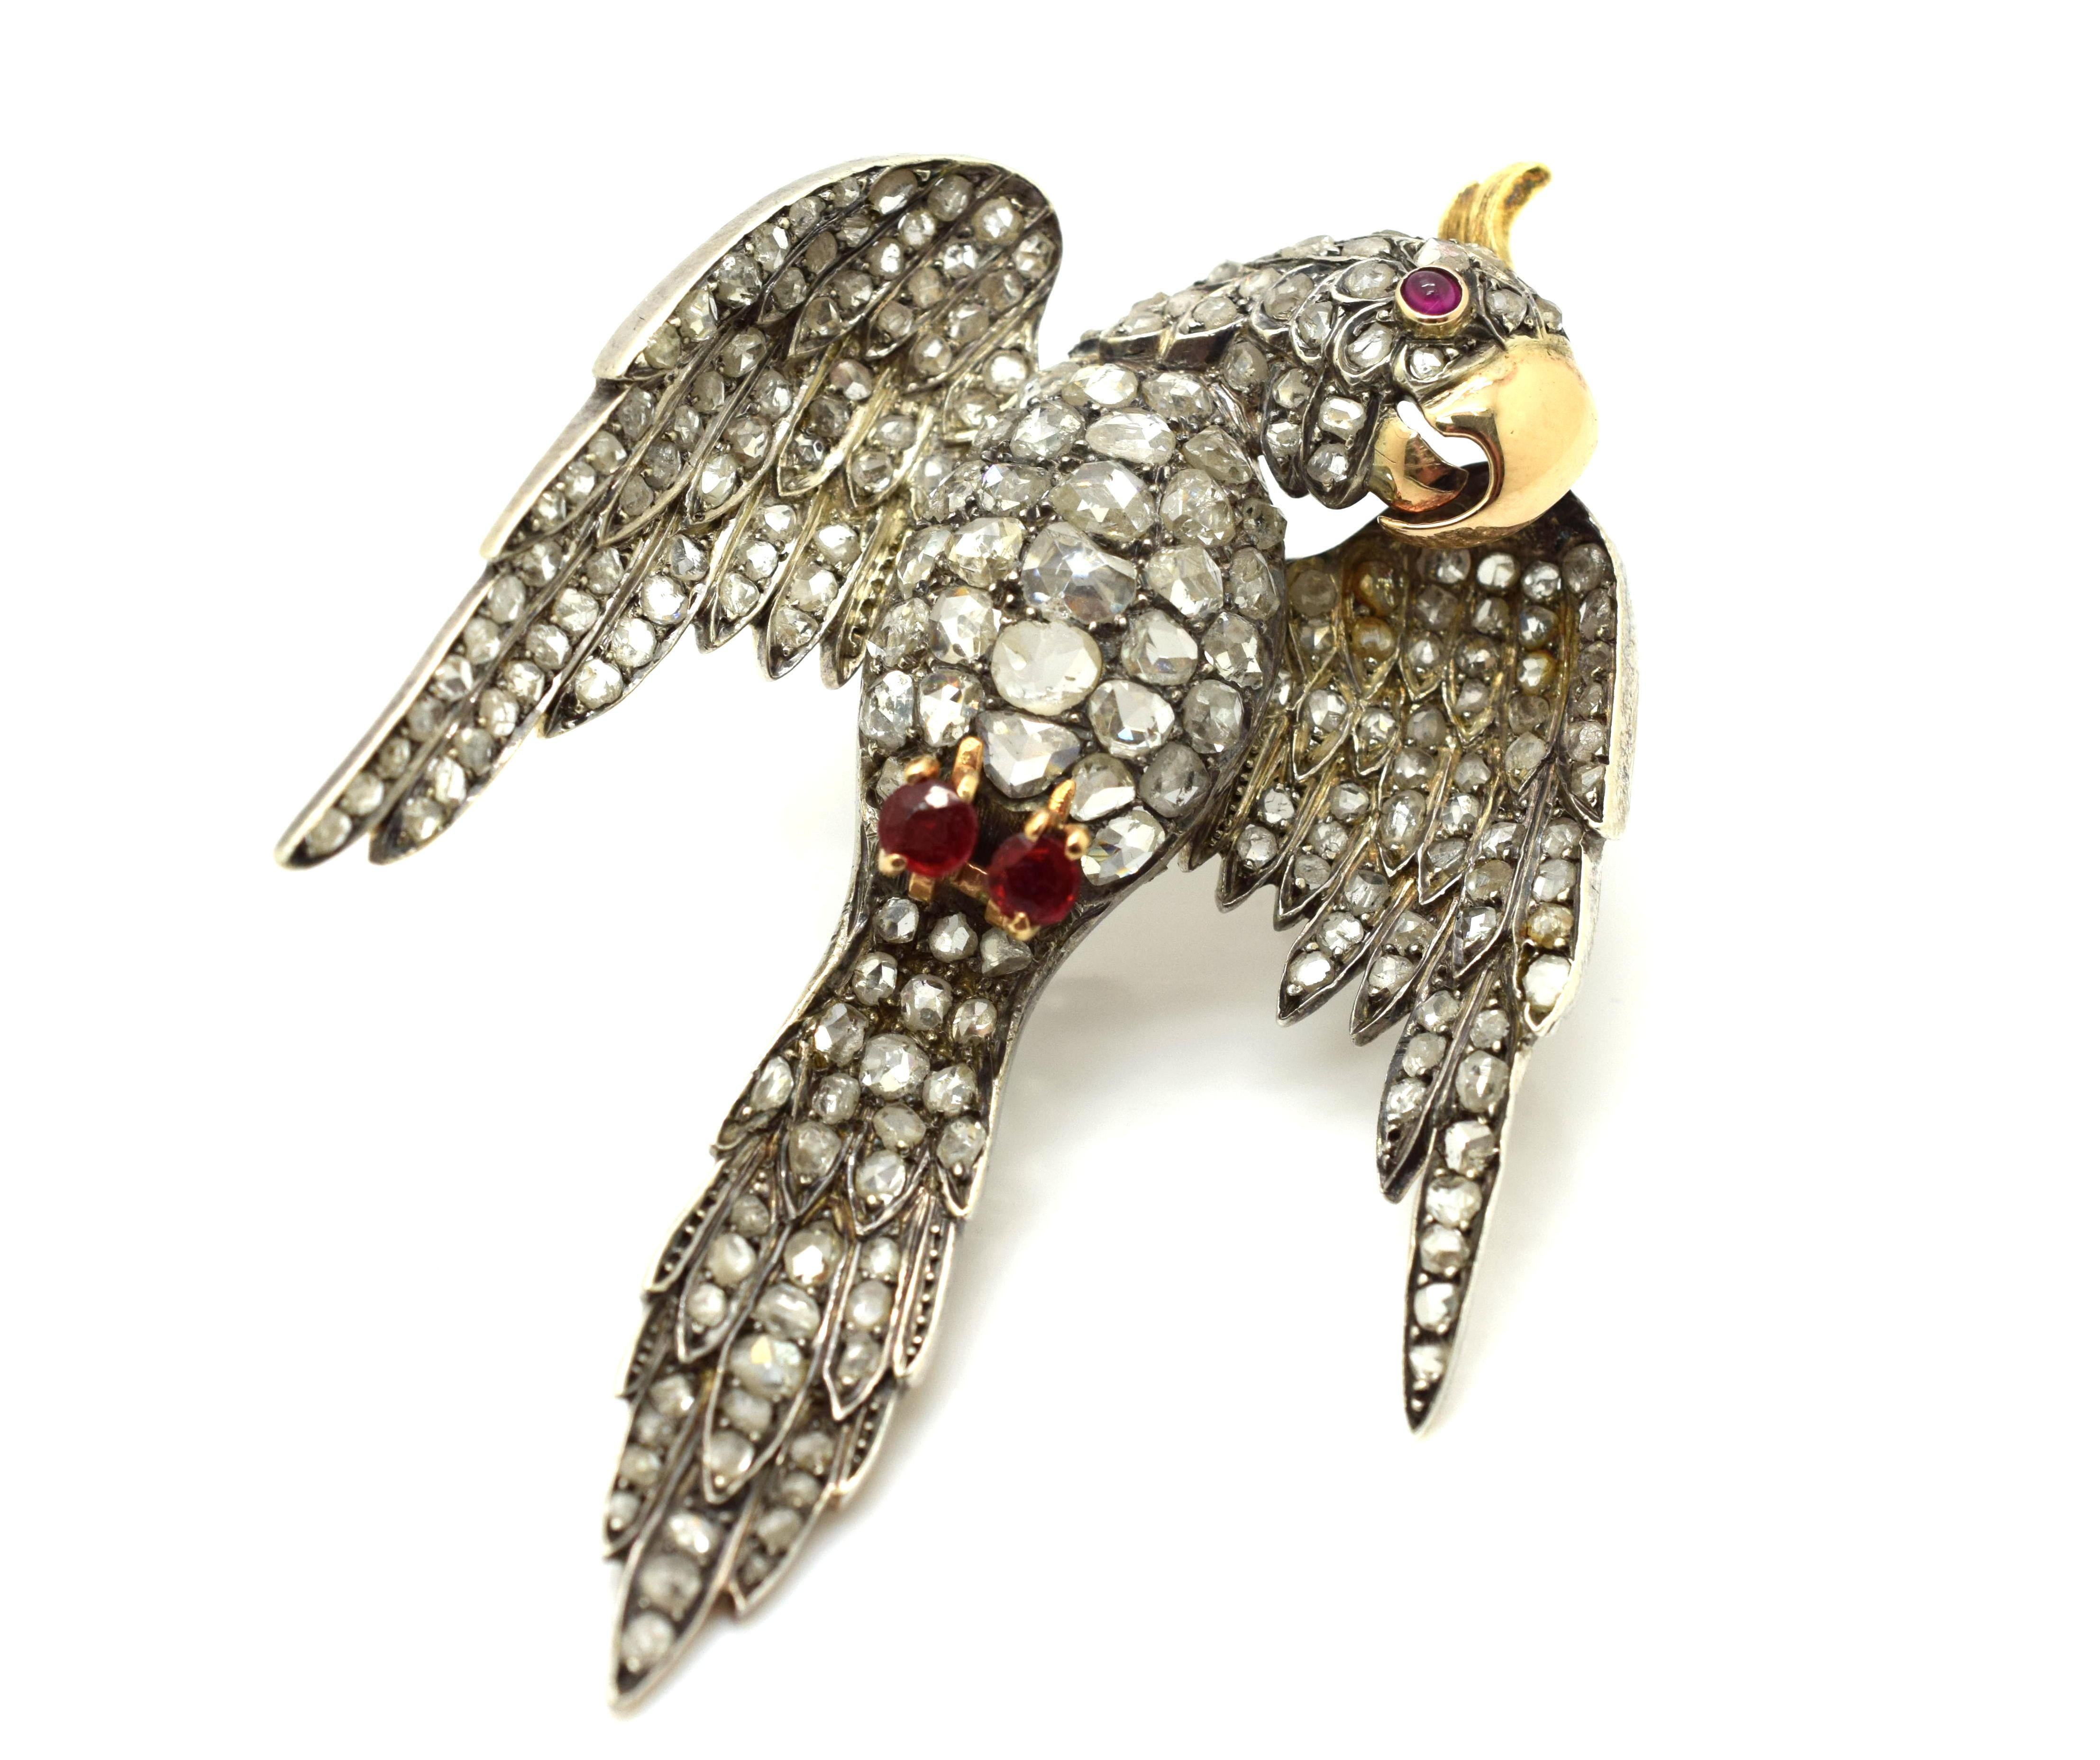 One of a kind Victorian Parrot Brooch set in Silver and 18k Yellow Gold. This brooch can be fastened as a pendant or attached as a brooch. Truly a work of art this piece is set with over 20 cts. of natural Rose Cut Diamonds ranging in sizes